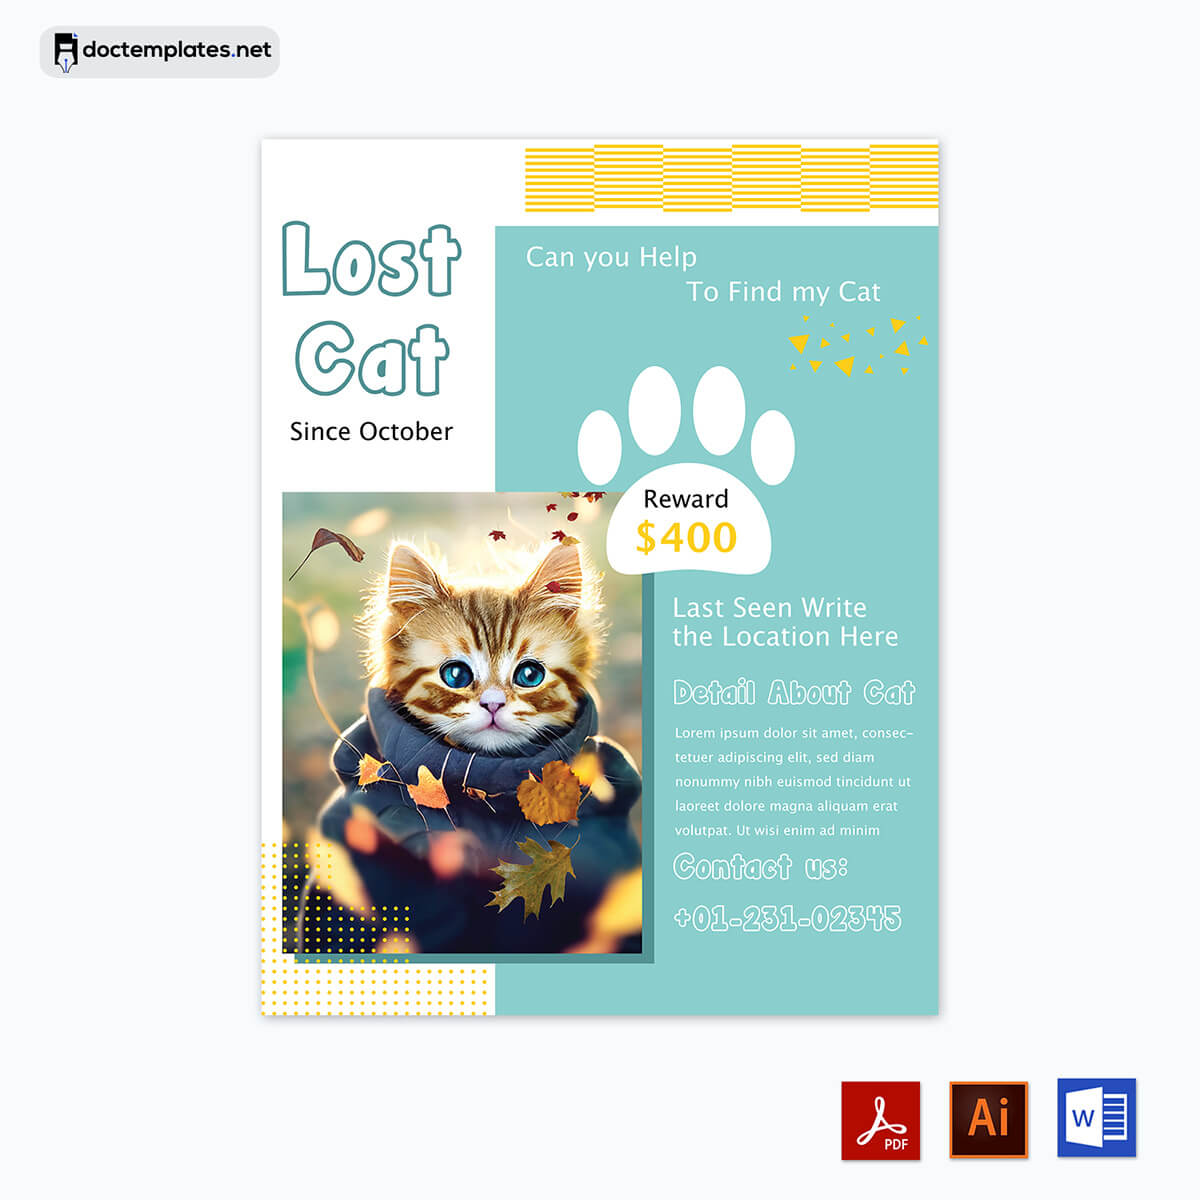 "Word-Based Pet Finder Template" - Generate a powerful lost pet flyer in Word with this convenient template.